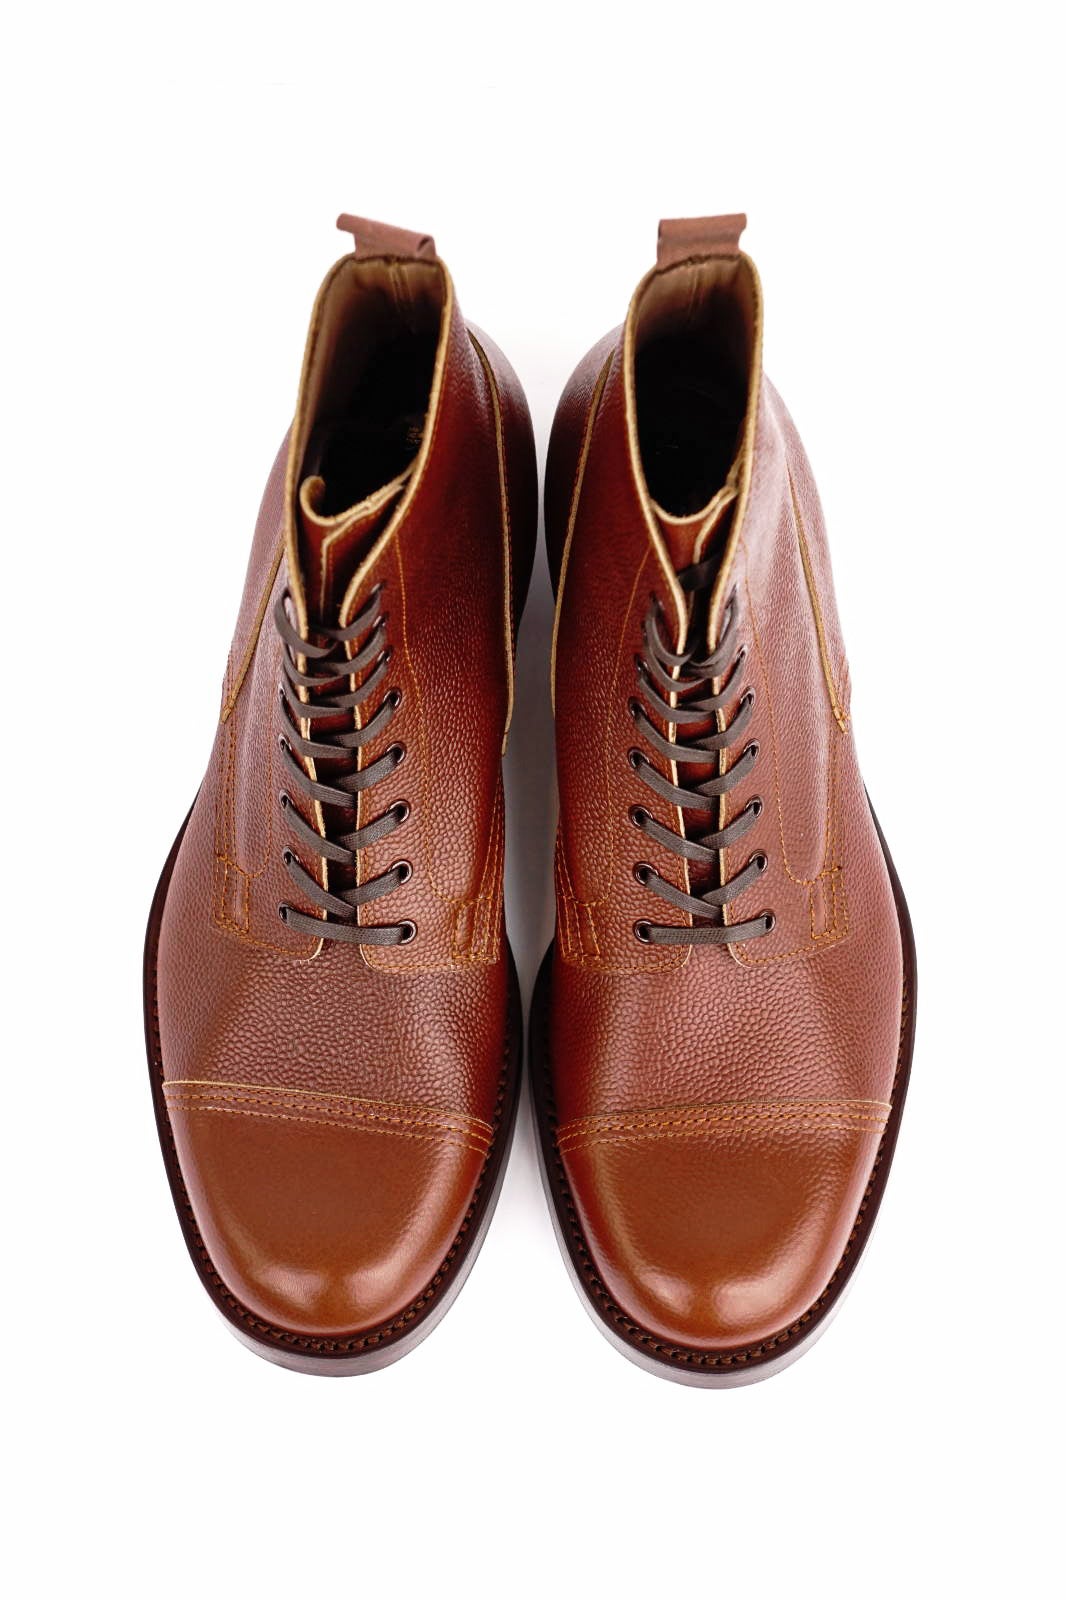 CLINCH Graham Boots Brown Embos 入荷!! | B.S.W. market place Blog